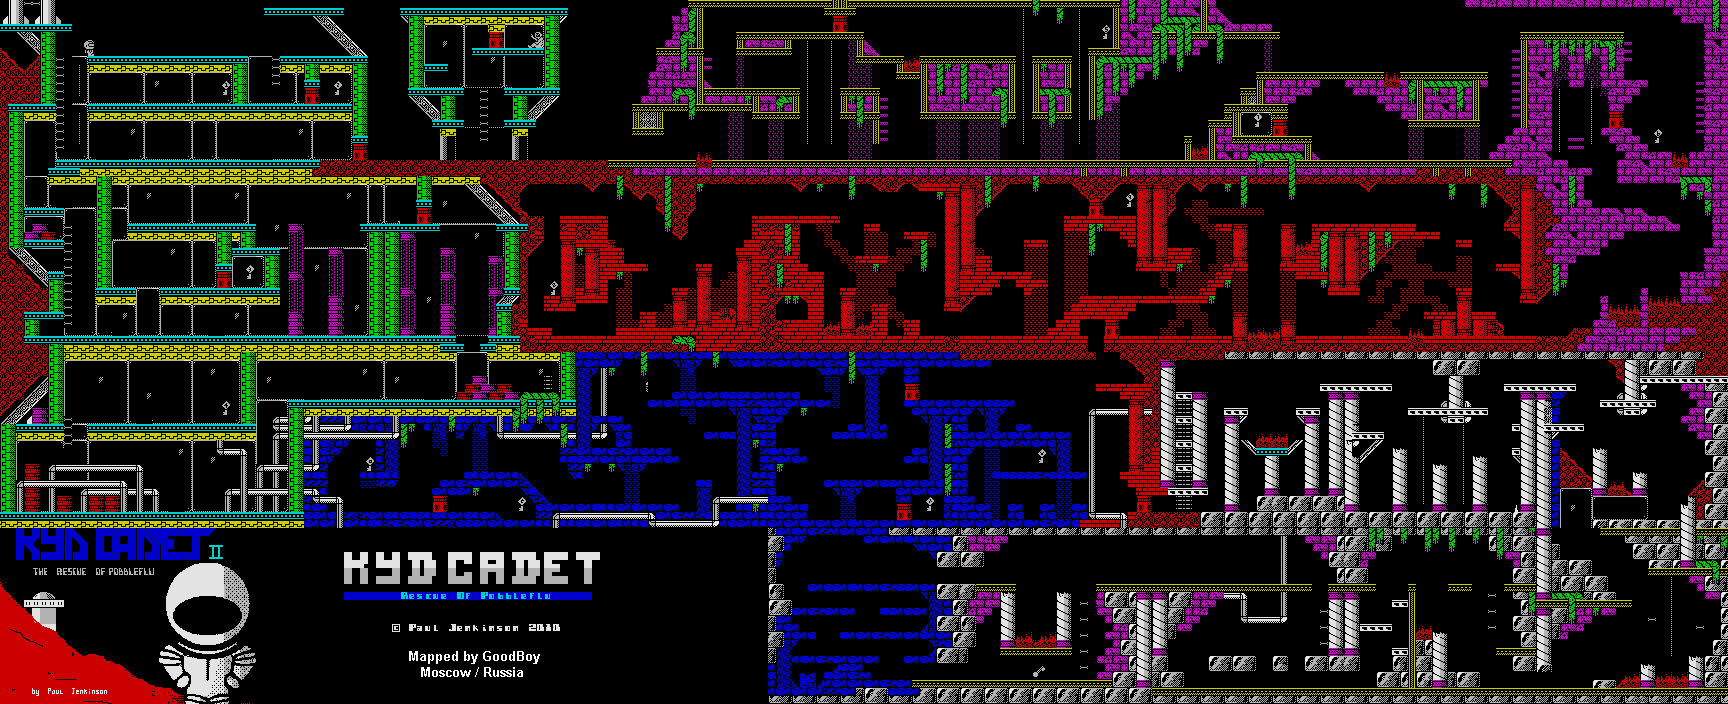 Kyd Cadet 2 - The Rescue of Pobbleflu - The Map